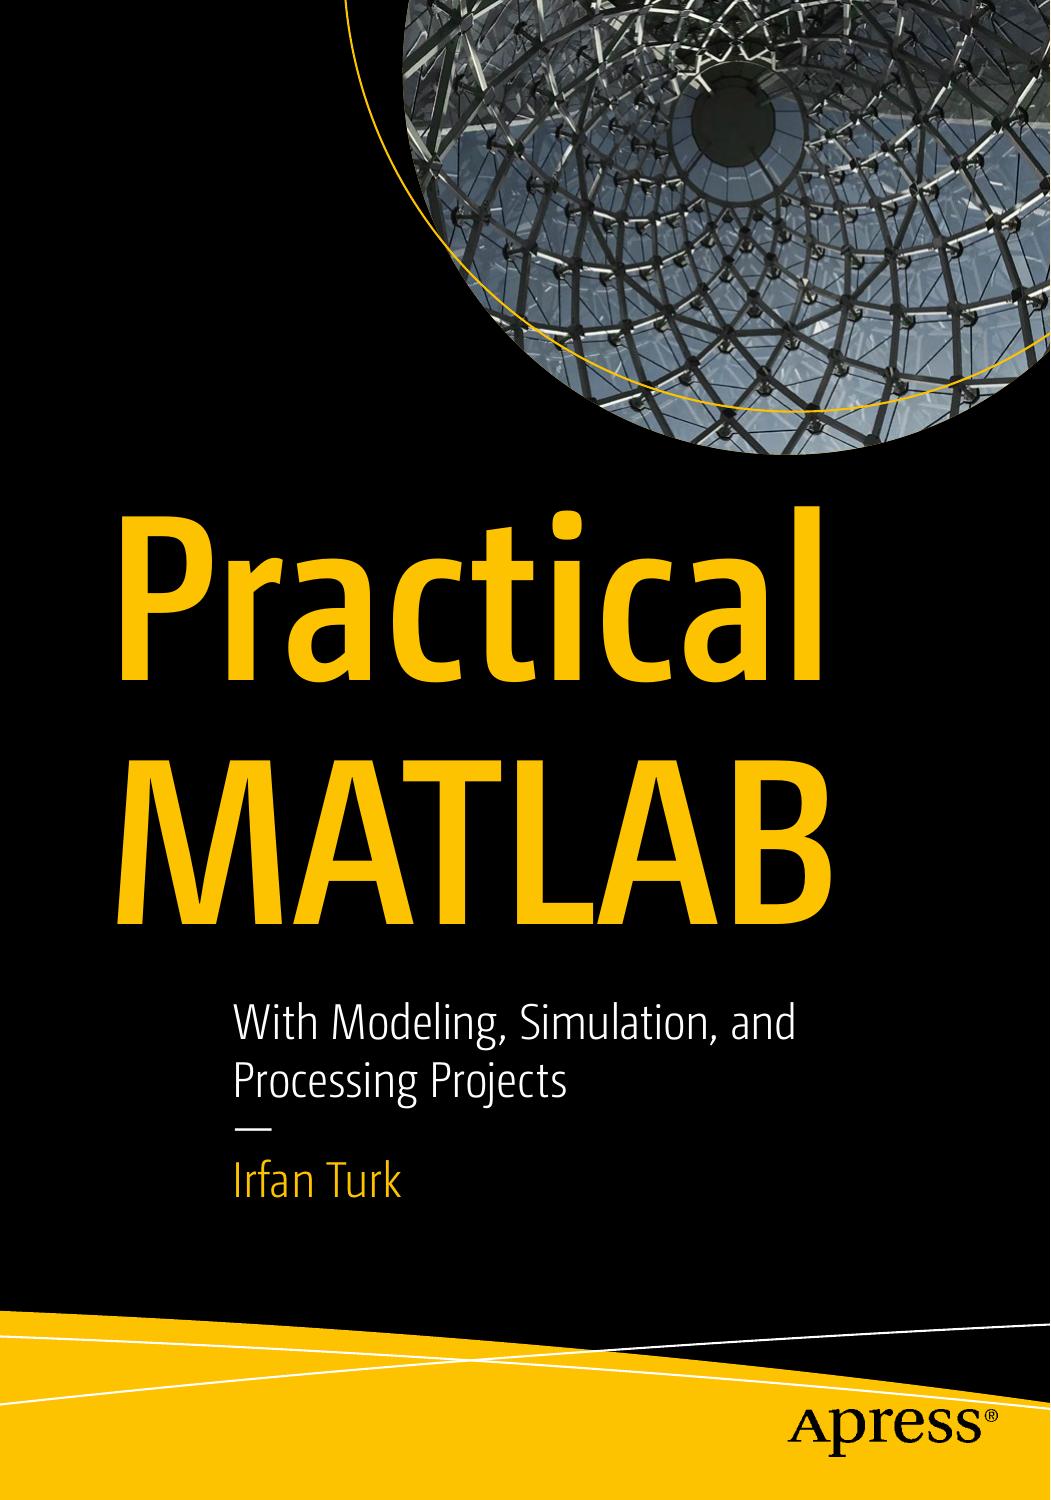 Practical MATLAB With Modeling, Simulation, And Processing Projects by Irfan Turk